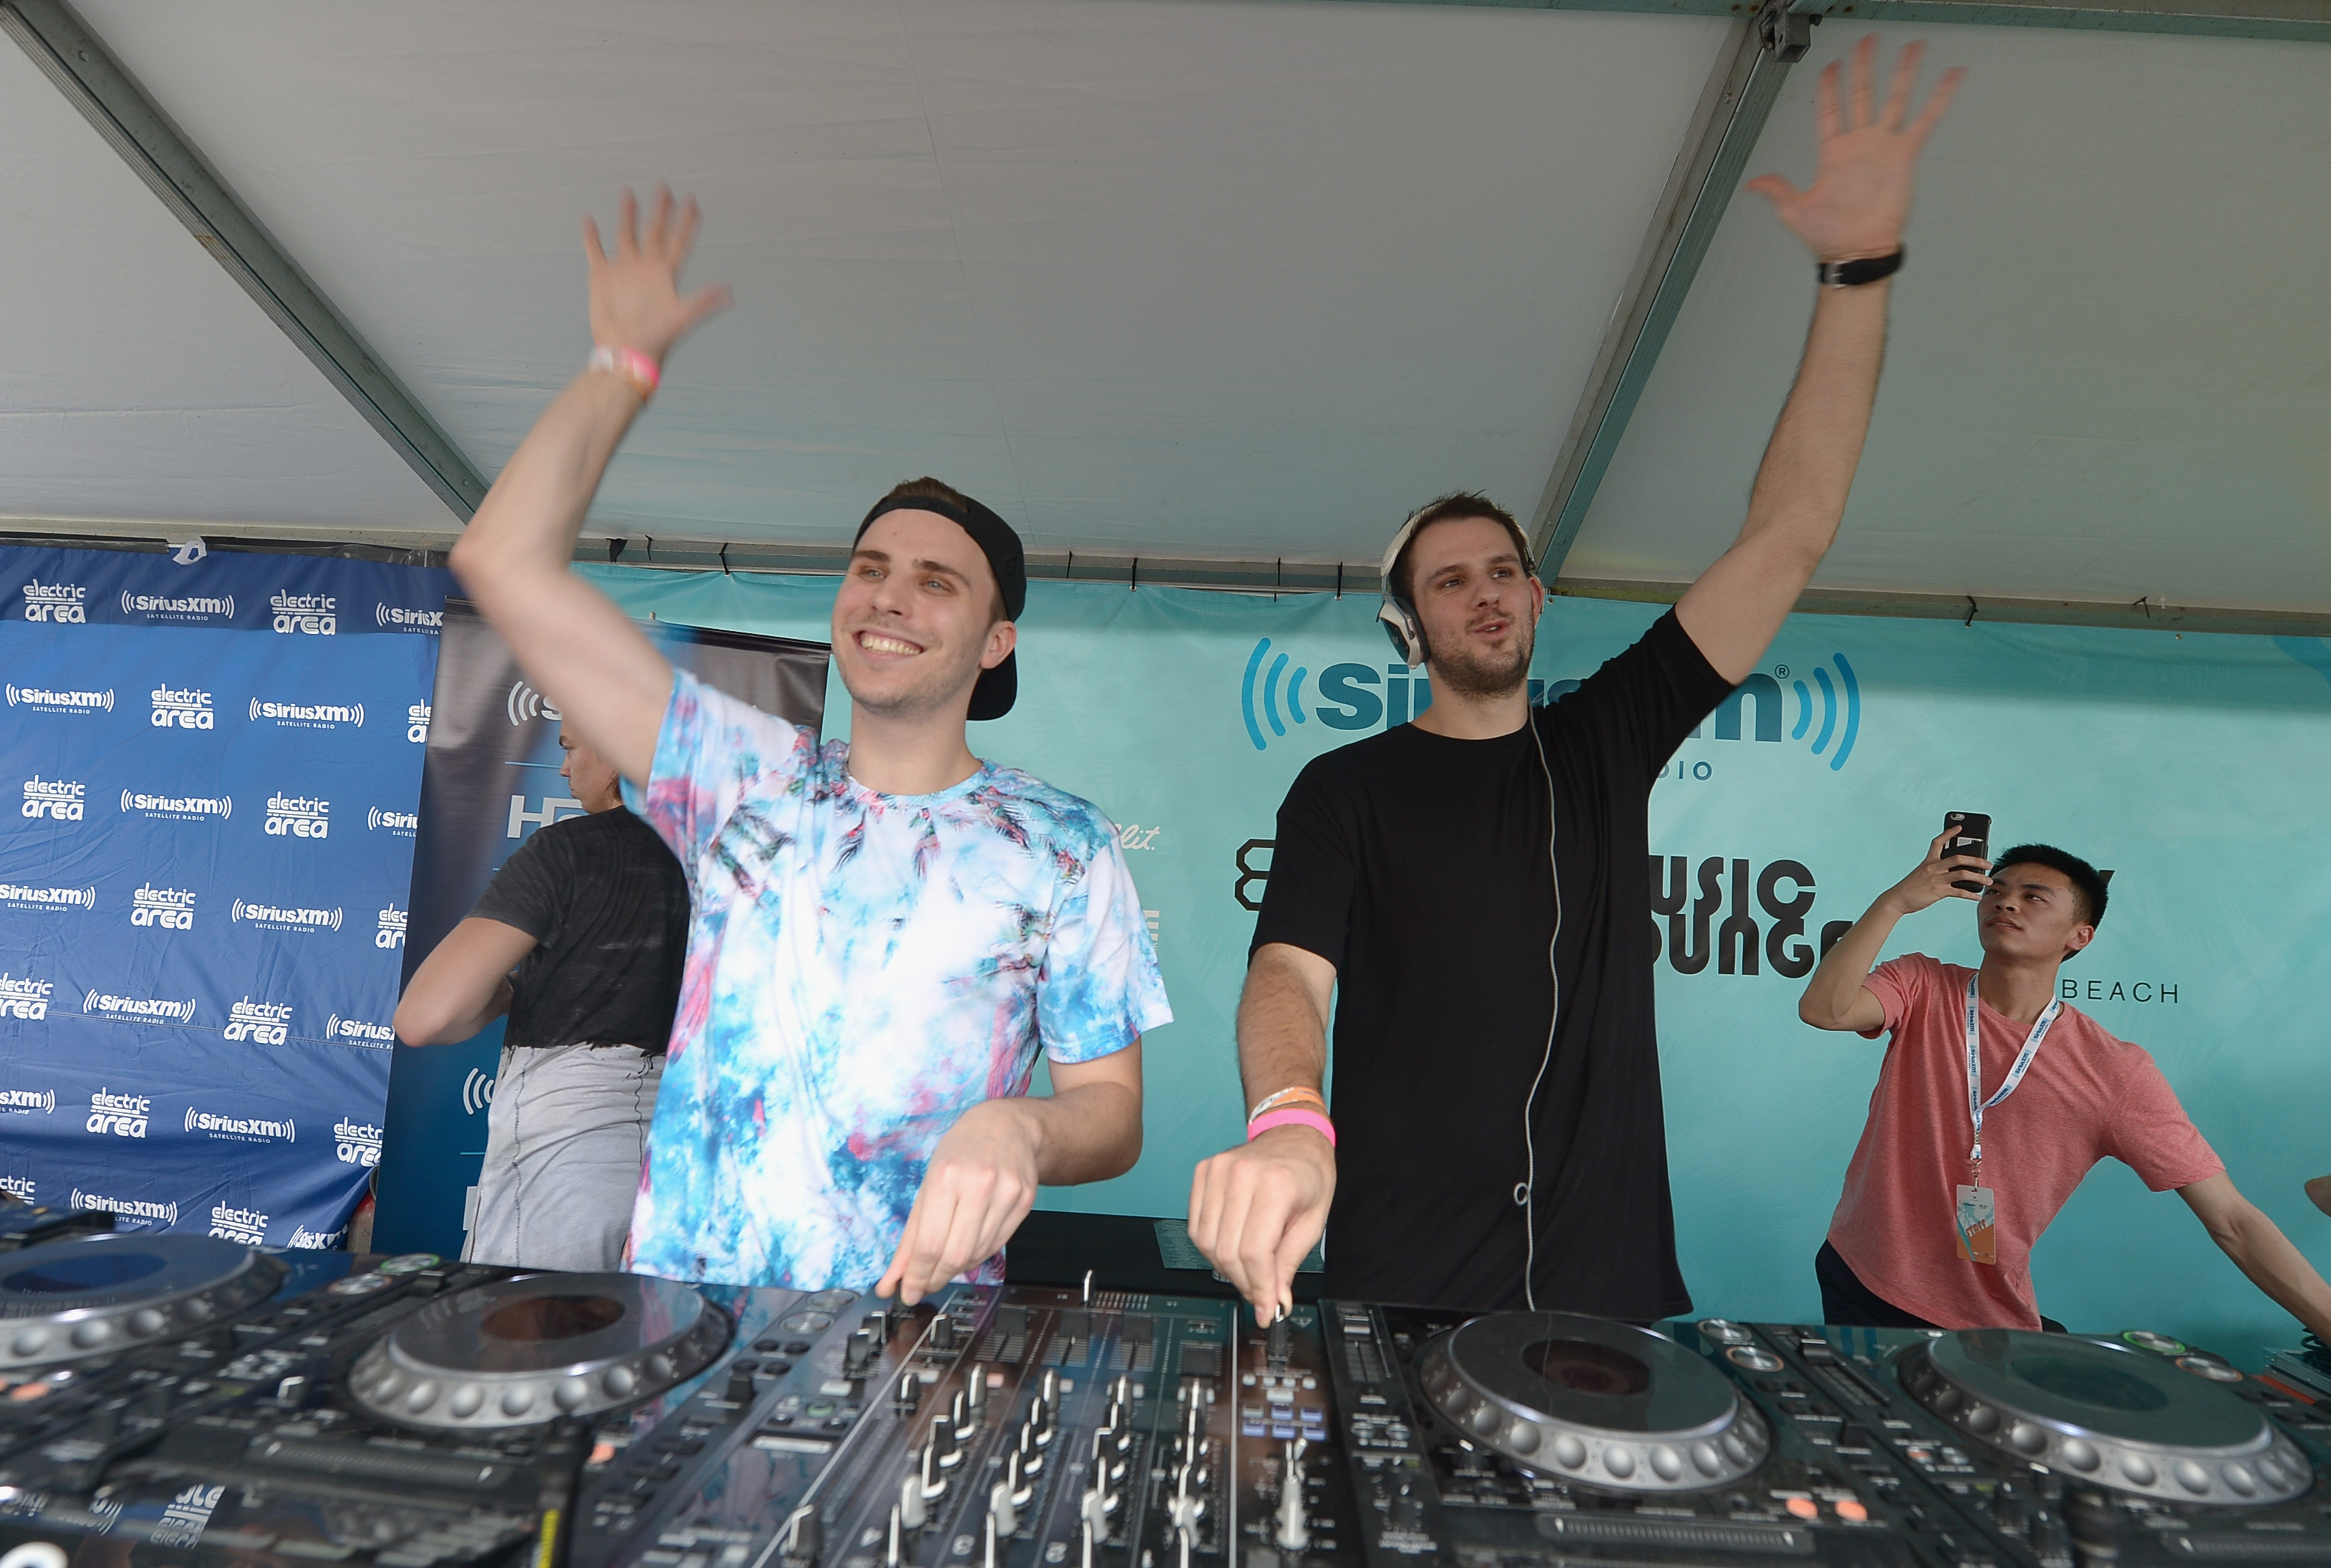 W perform at SiriusXM"s "UMF Radio" Broadcast Live From The SiriusXM Music Lounge at W Hotel